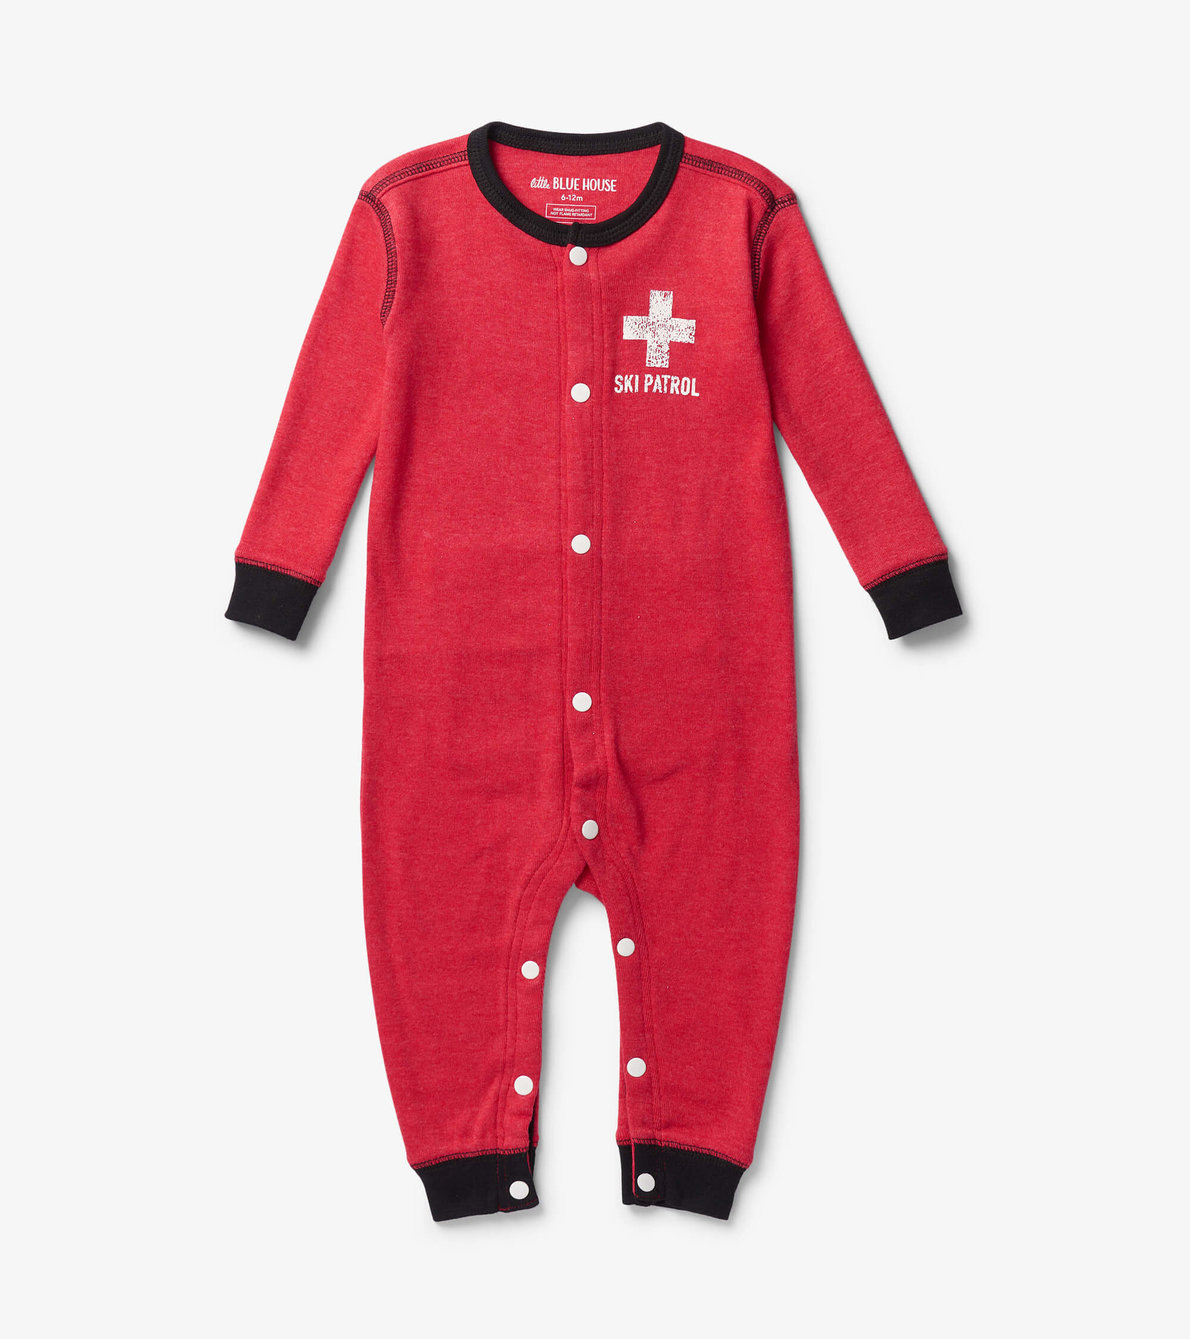 View larger image of Ski Patrol Baby Union Suit